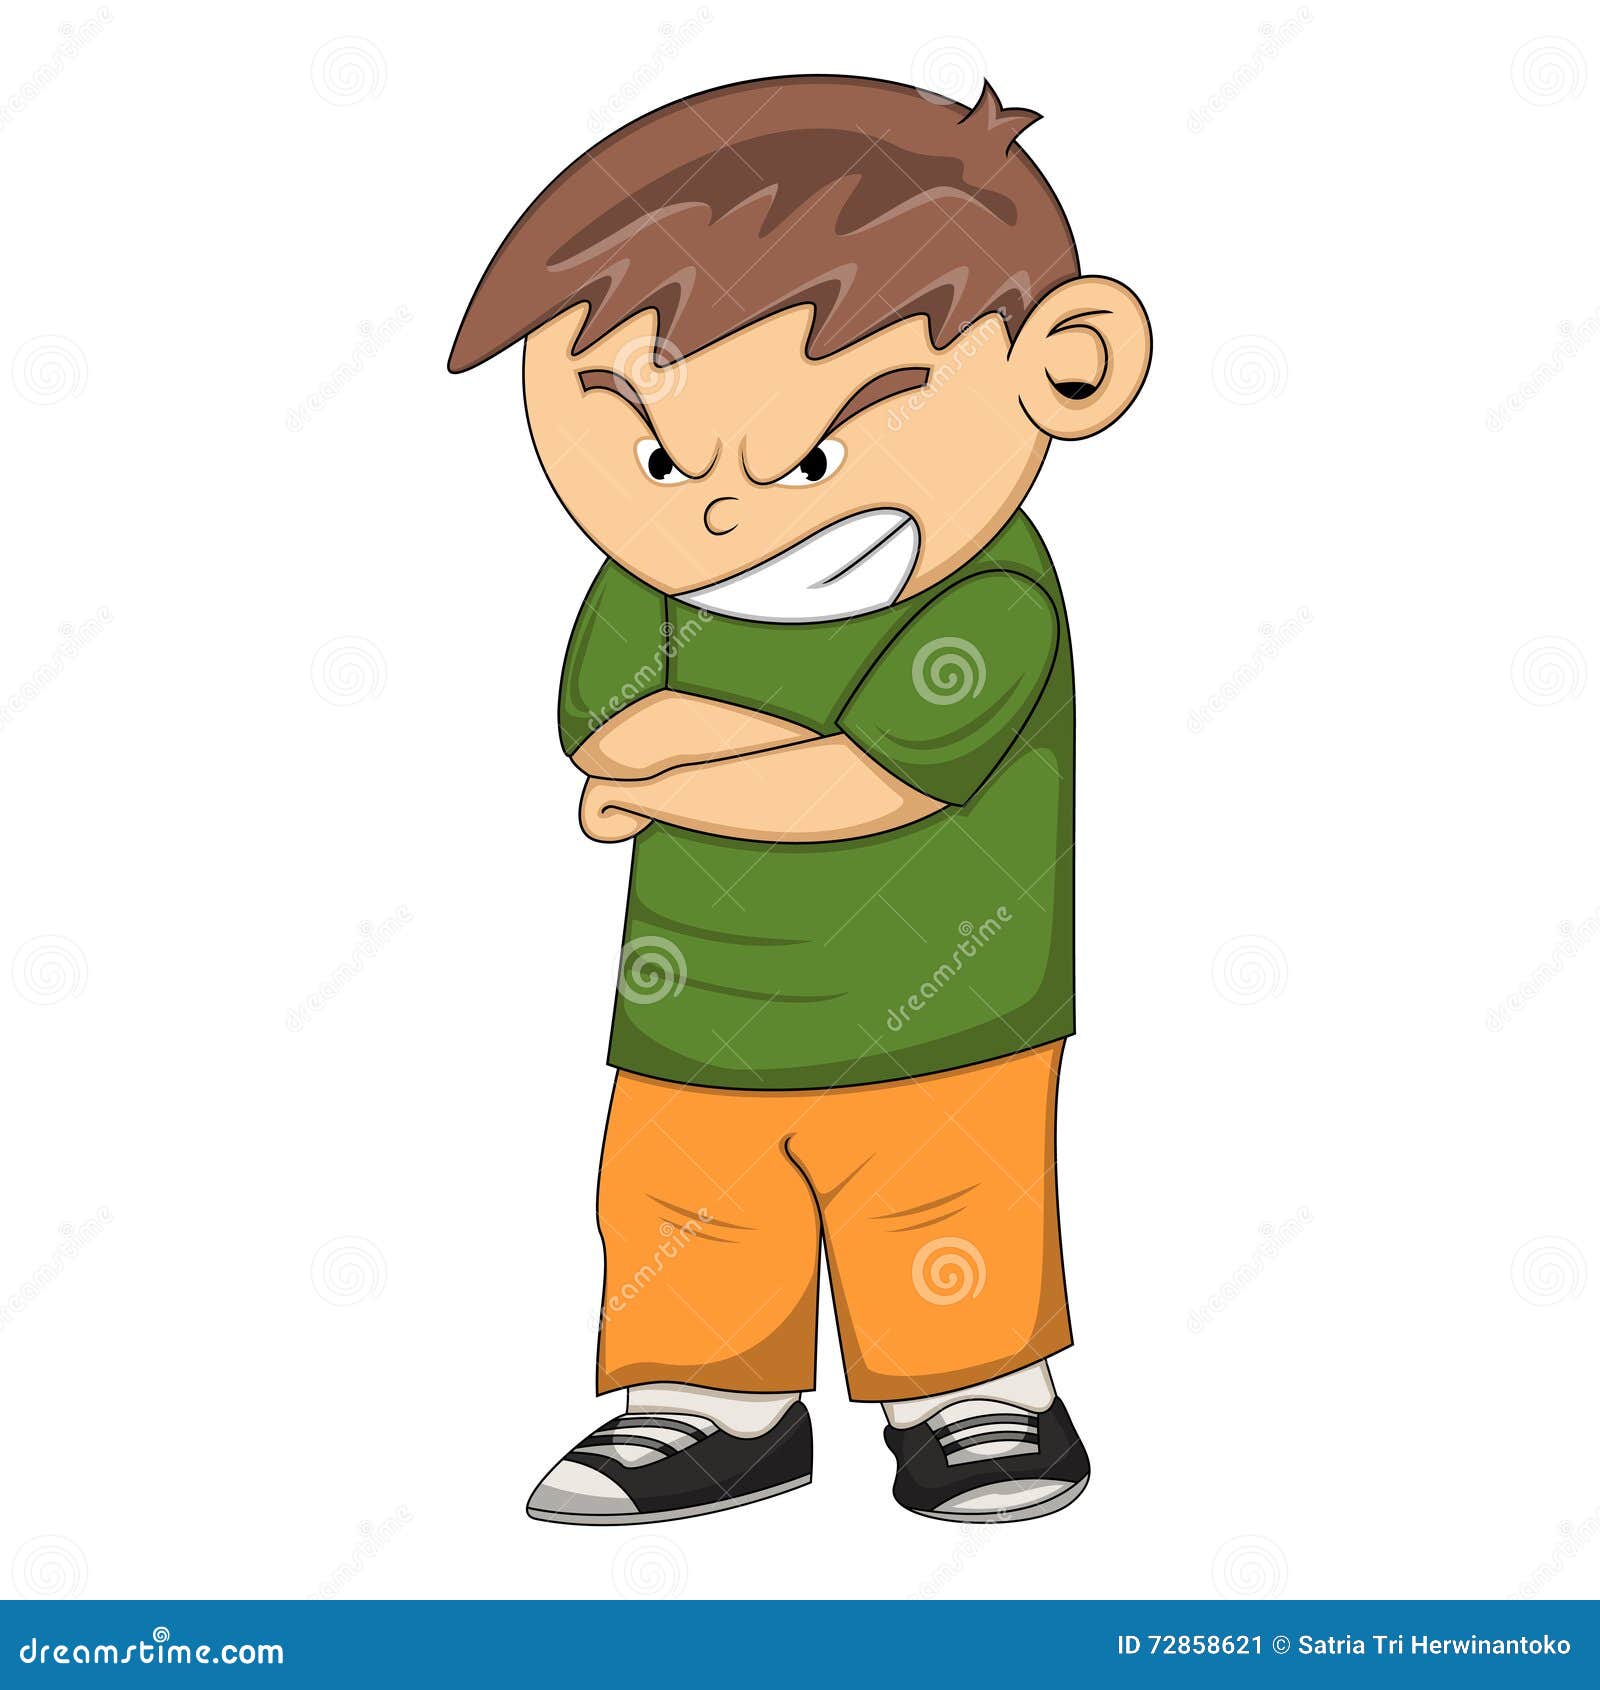 Angry boy cartoon stock vector. Illustration of crossed - 72858621